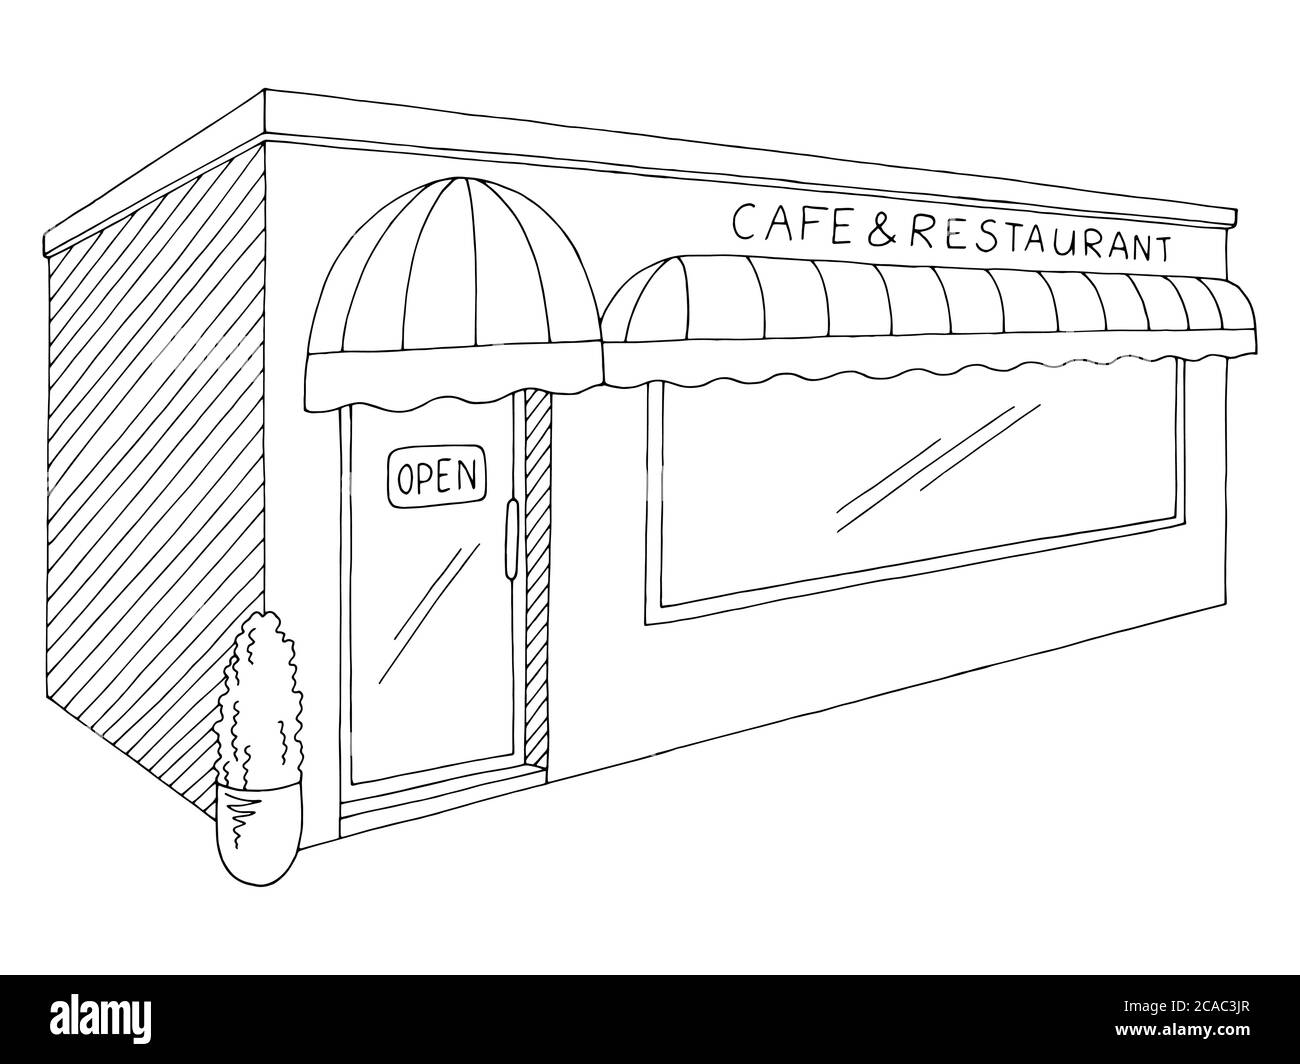 Restaurant shop exterior template classical handdrawn sketch Vectors  graphic art designs in editable ai eps svg cdr format free and easy  download unlimit id6853902